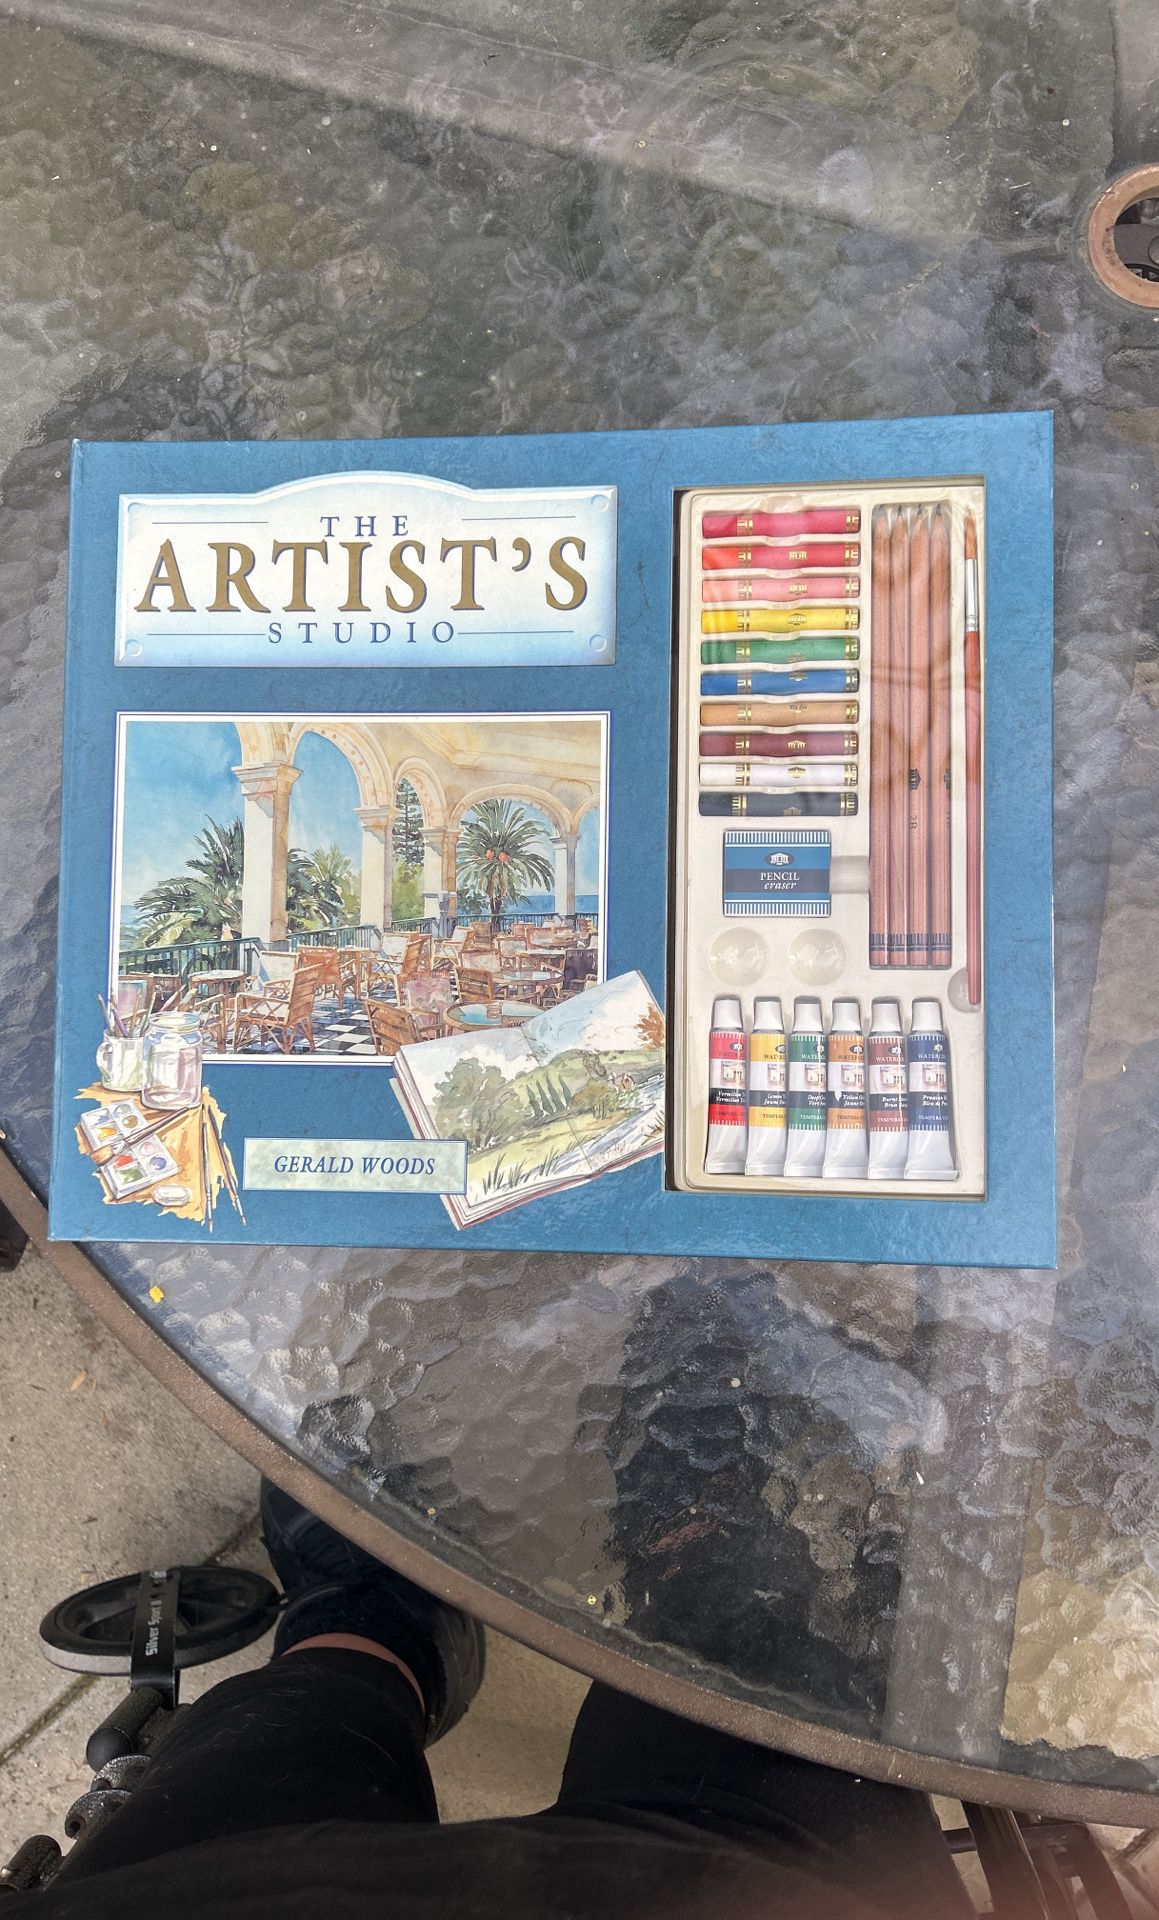 The Artist’s Studio - Starter Kit To Explore Watercolor Painting, Charcoal & More